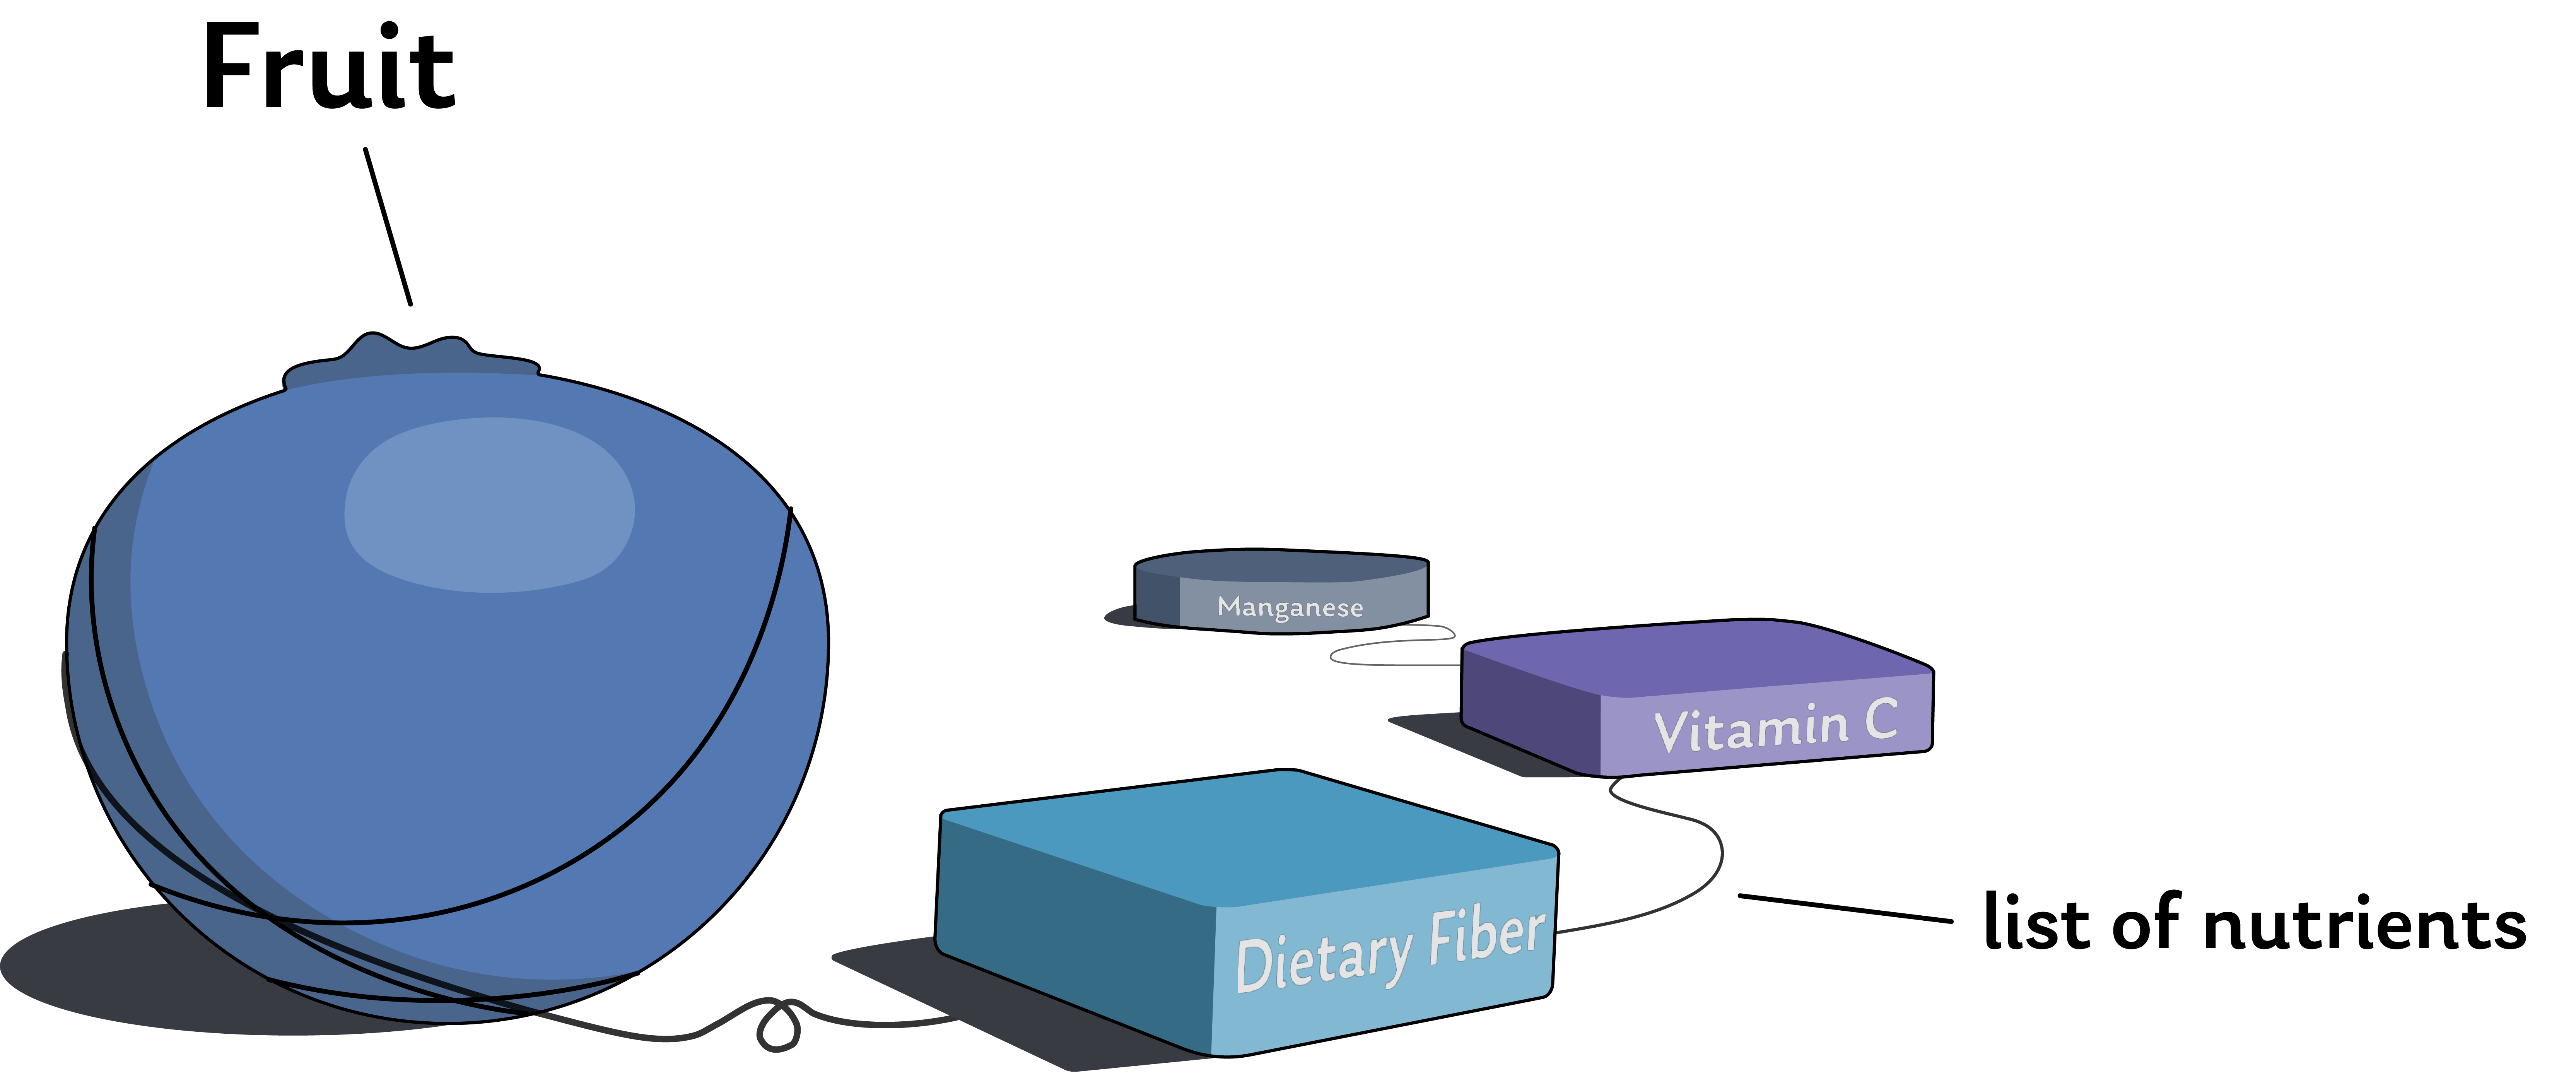 A list of nutrients, ("Dietary Fiber", "Vitamin C", "Manganese") strung out behind the blueberry they relate to.